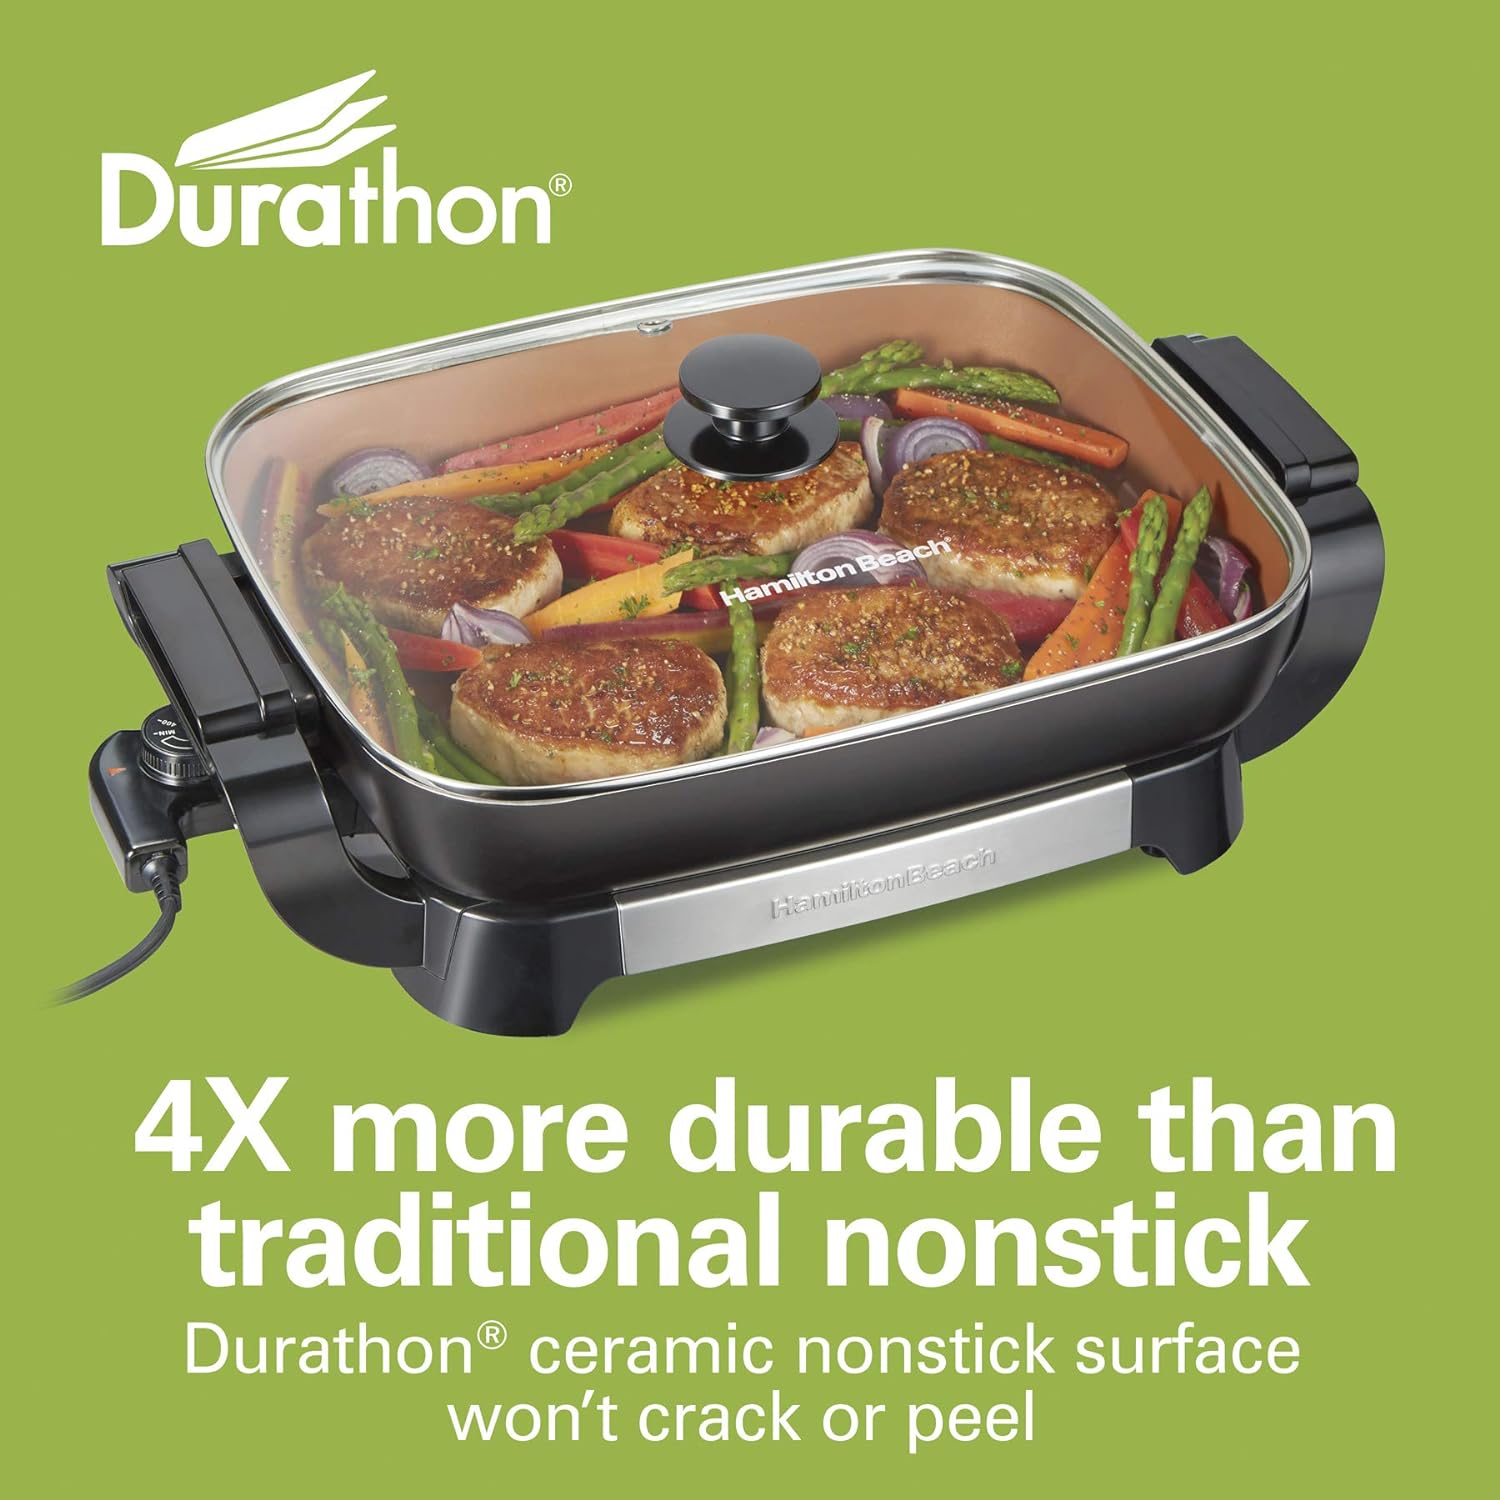 Hamilton Beach Durathon Ceramic Electric Skillet with Removable 12x15” Pan, Adjustable Temperature  Slow Cooker, Extra Large 10 Quart, Stay or Go Portable, Dishwasher Safe Crock, Black